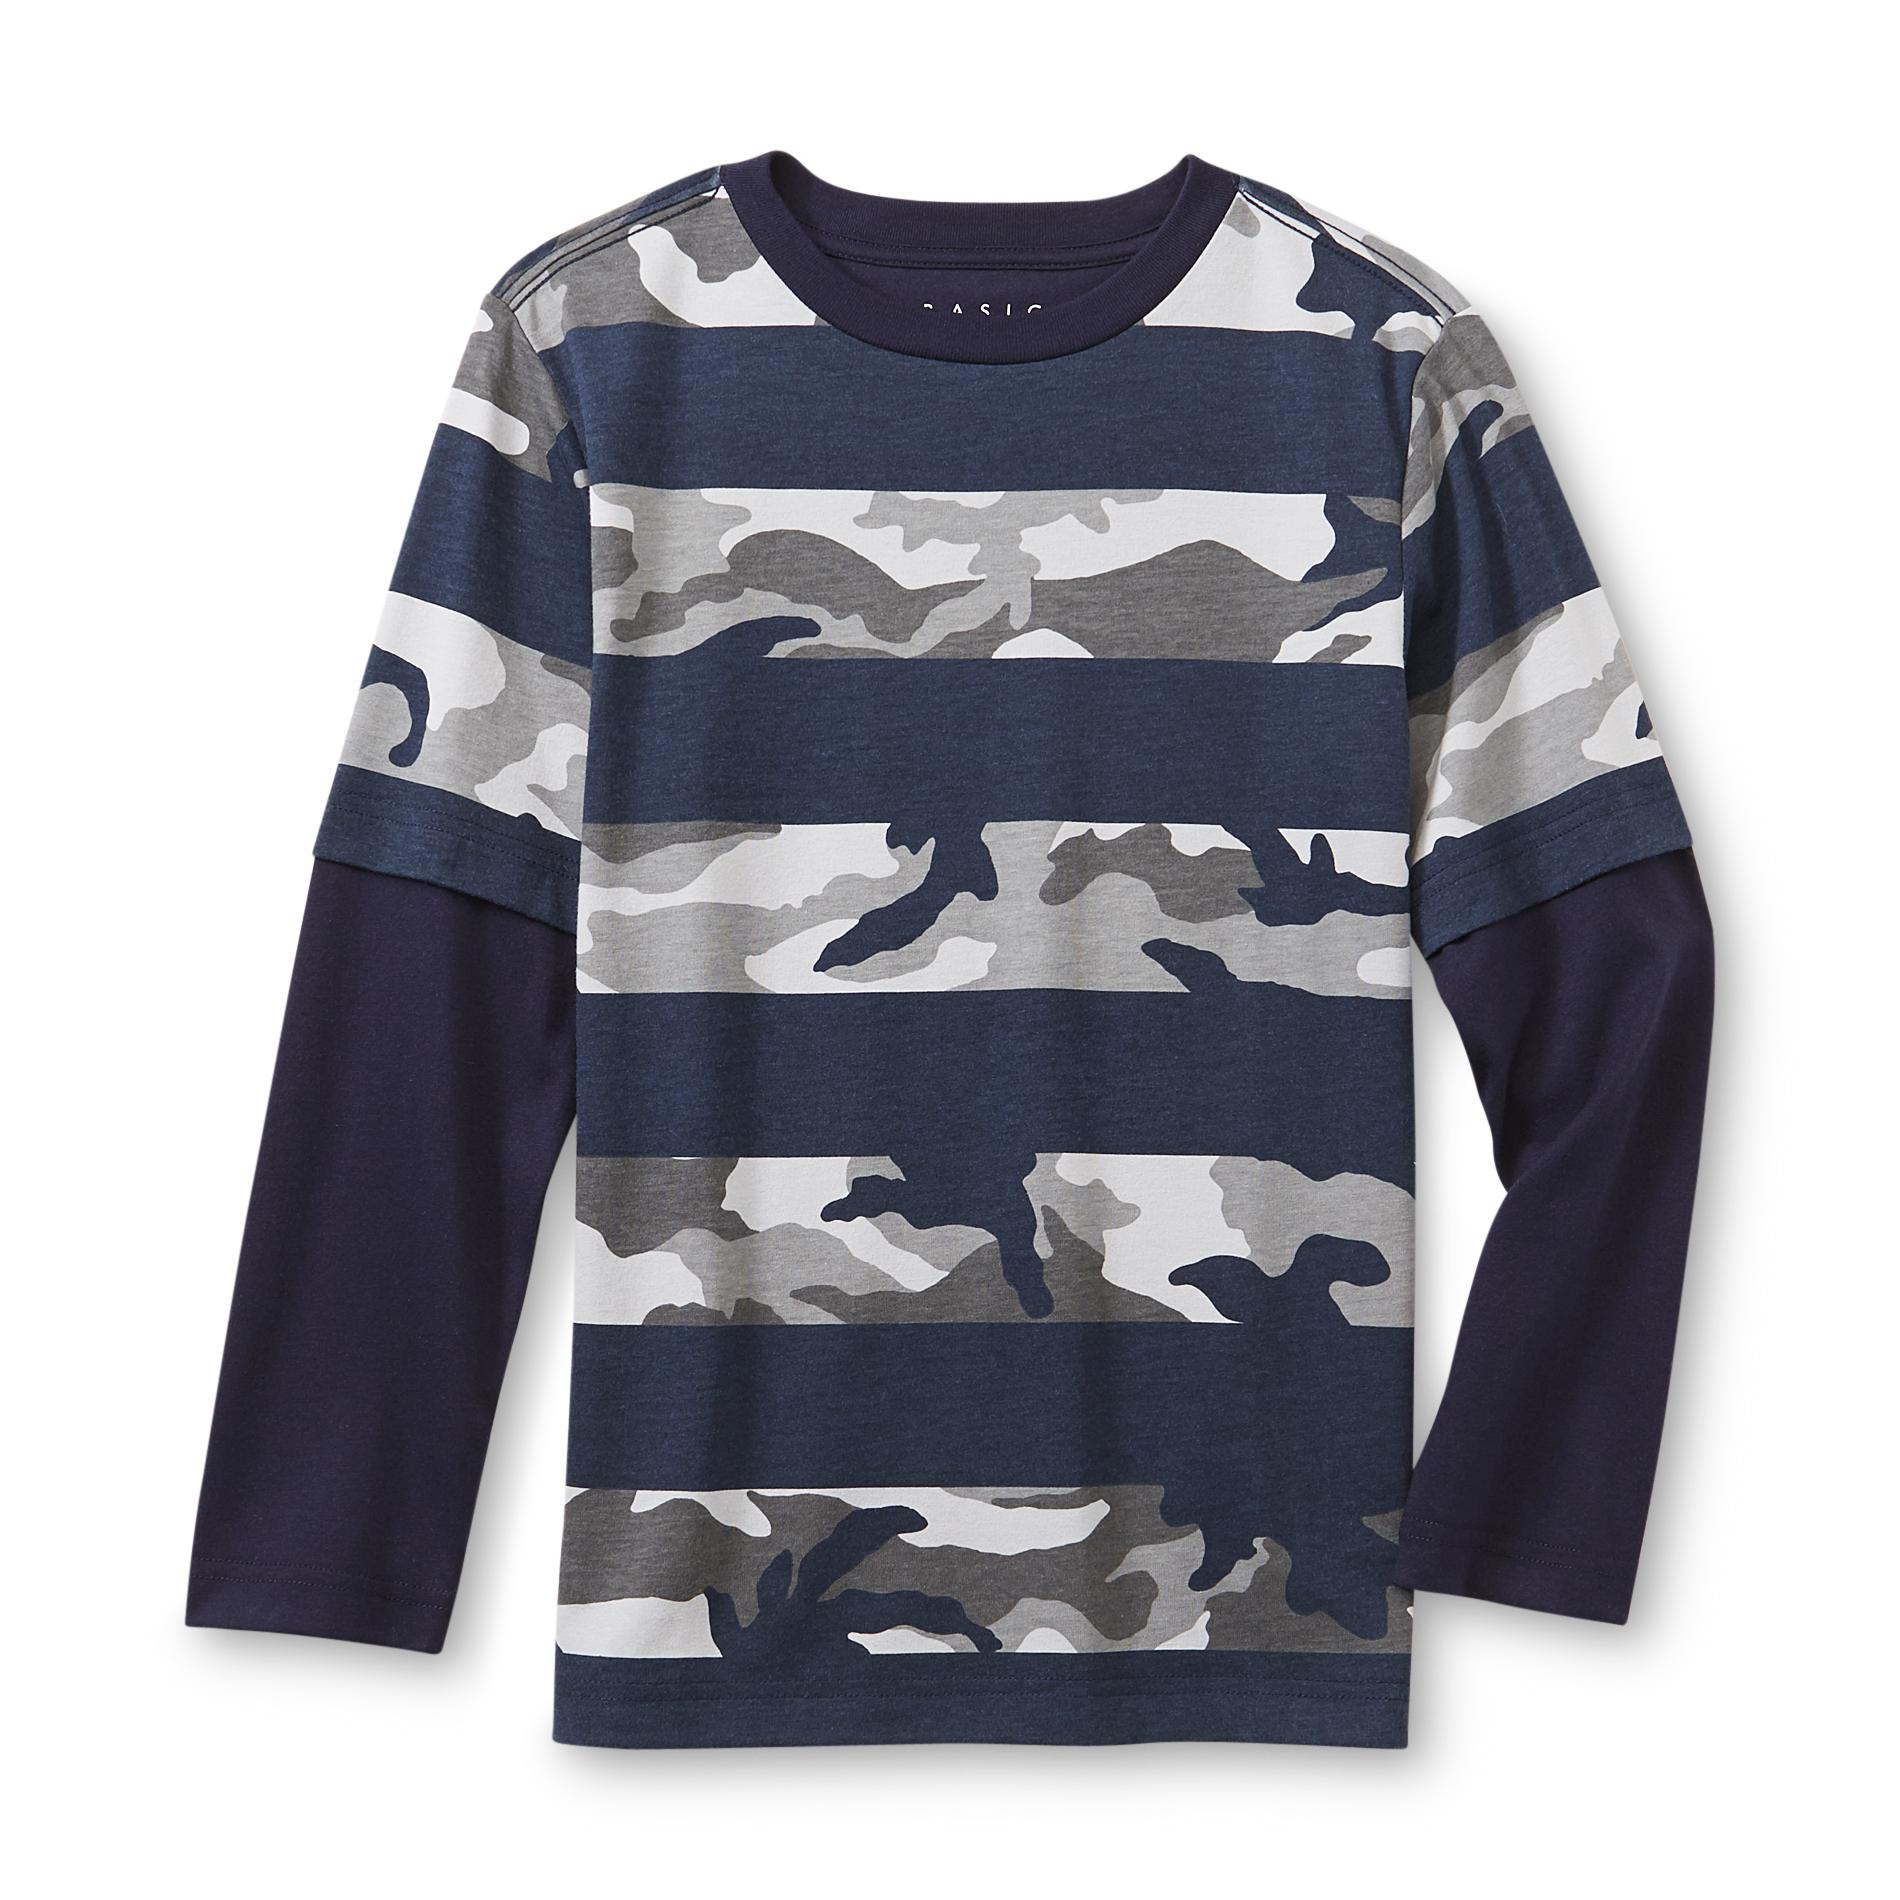 Basic Editions Boy's Long-Sleeve T-Shirt - Striped & Camouflage